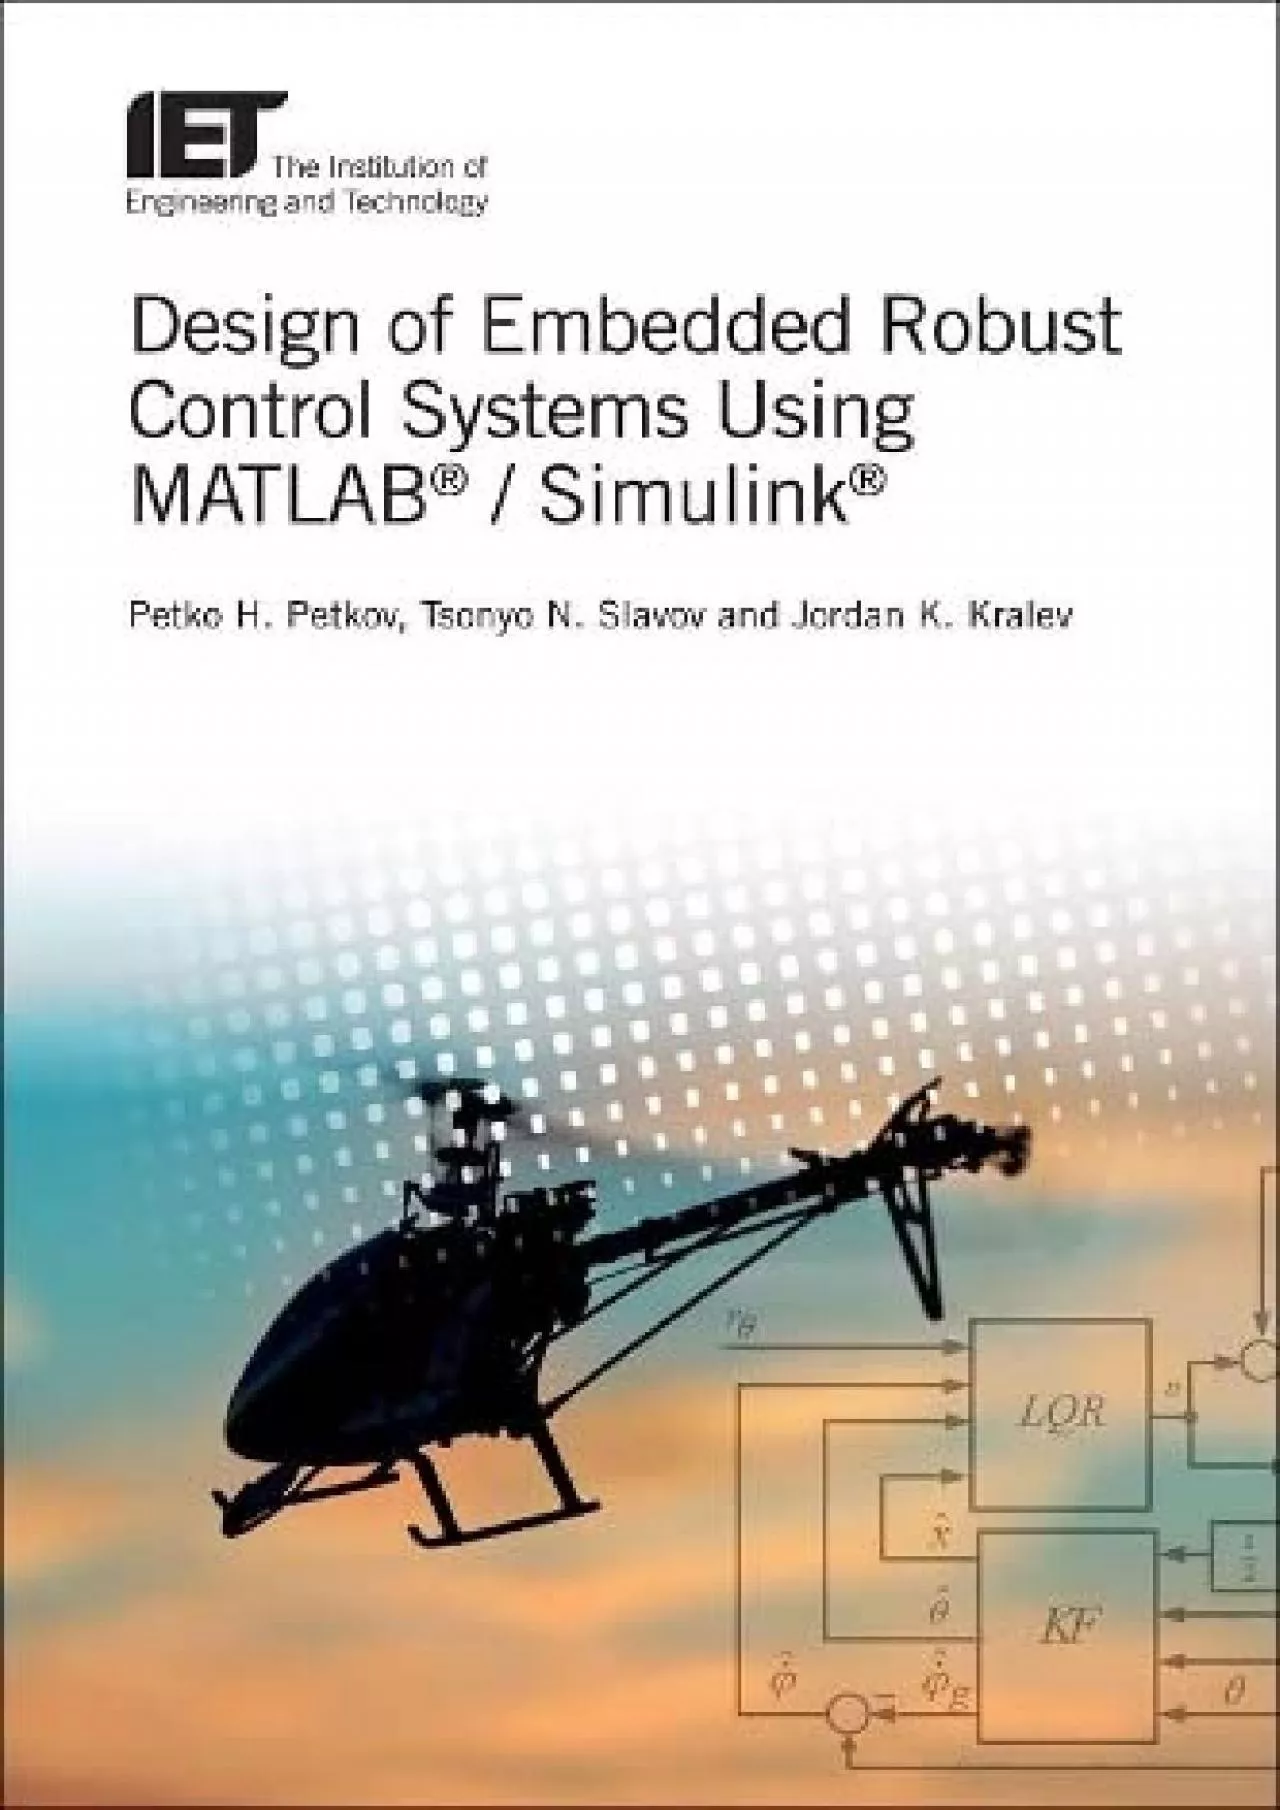 [FREE]-Design of Embedded Robust Control Systems Using MATLAB® / Simulink® (Control,